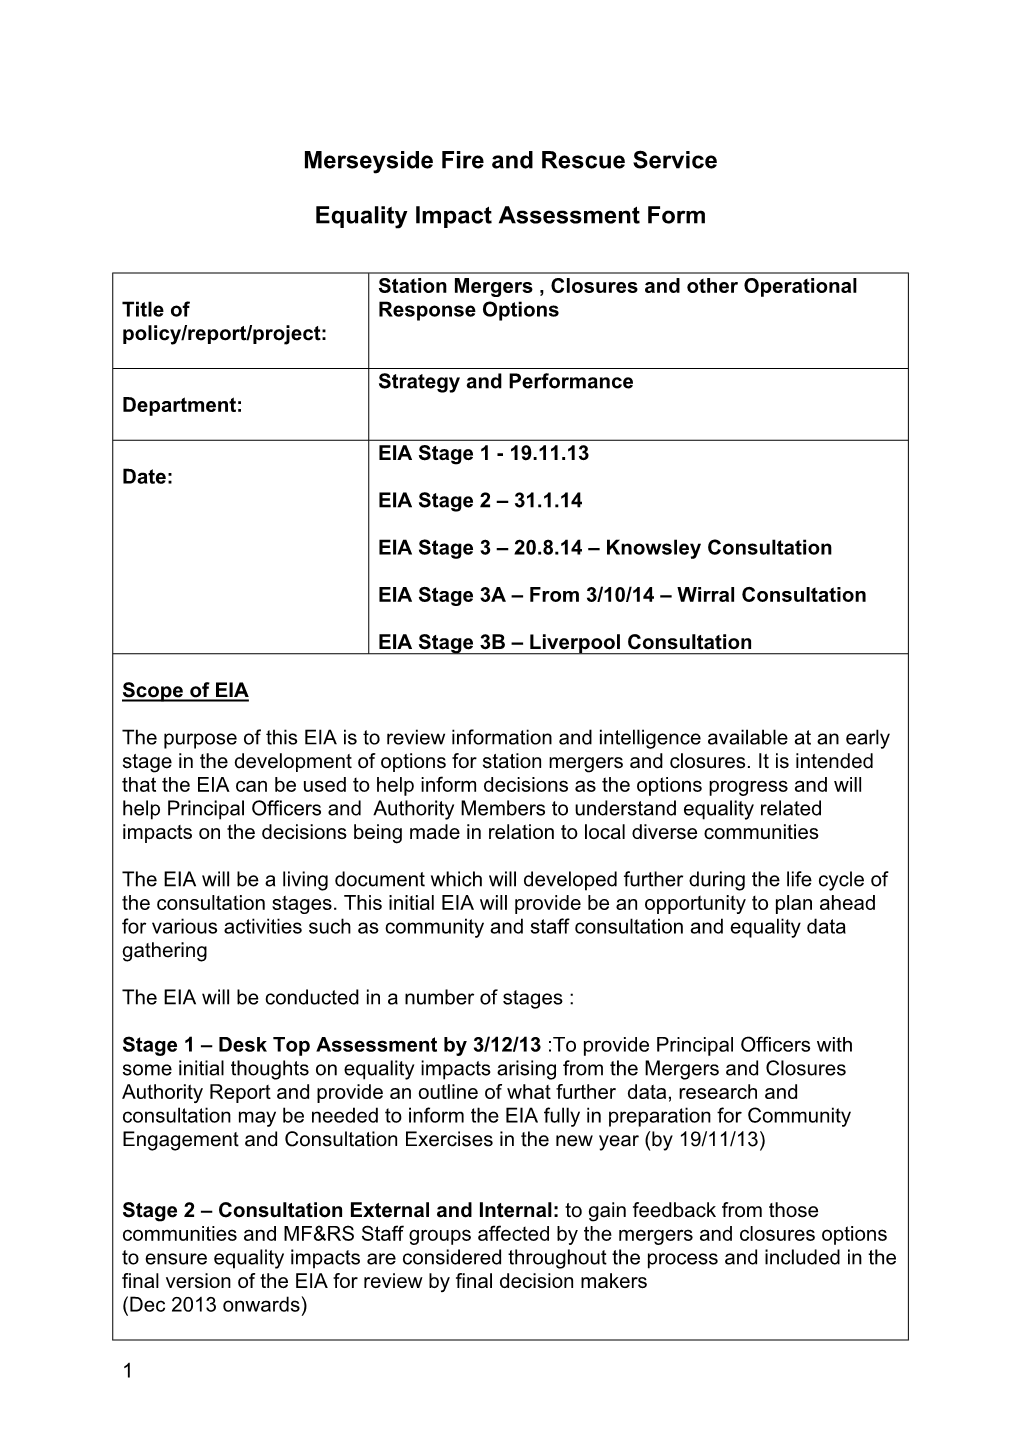 Merseyside Fire and Rescue Service Equality Impact Assessment Form